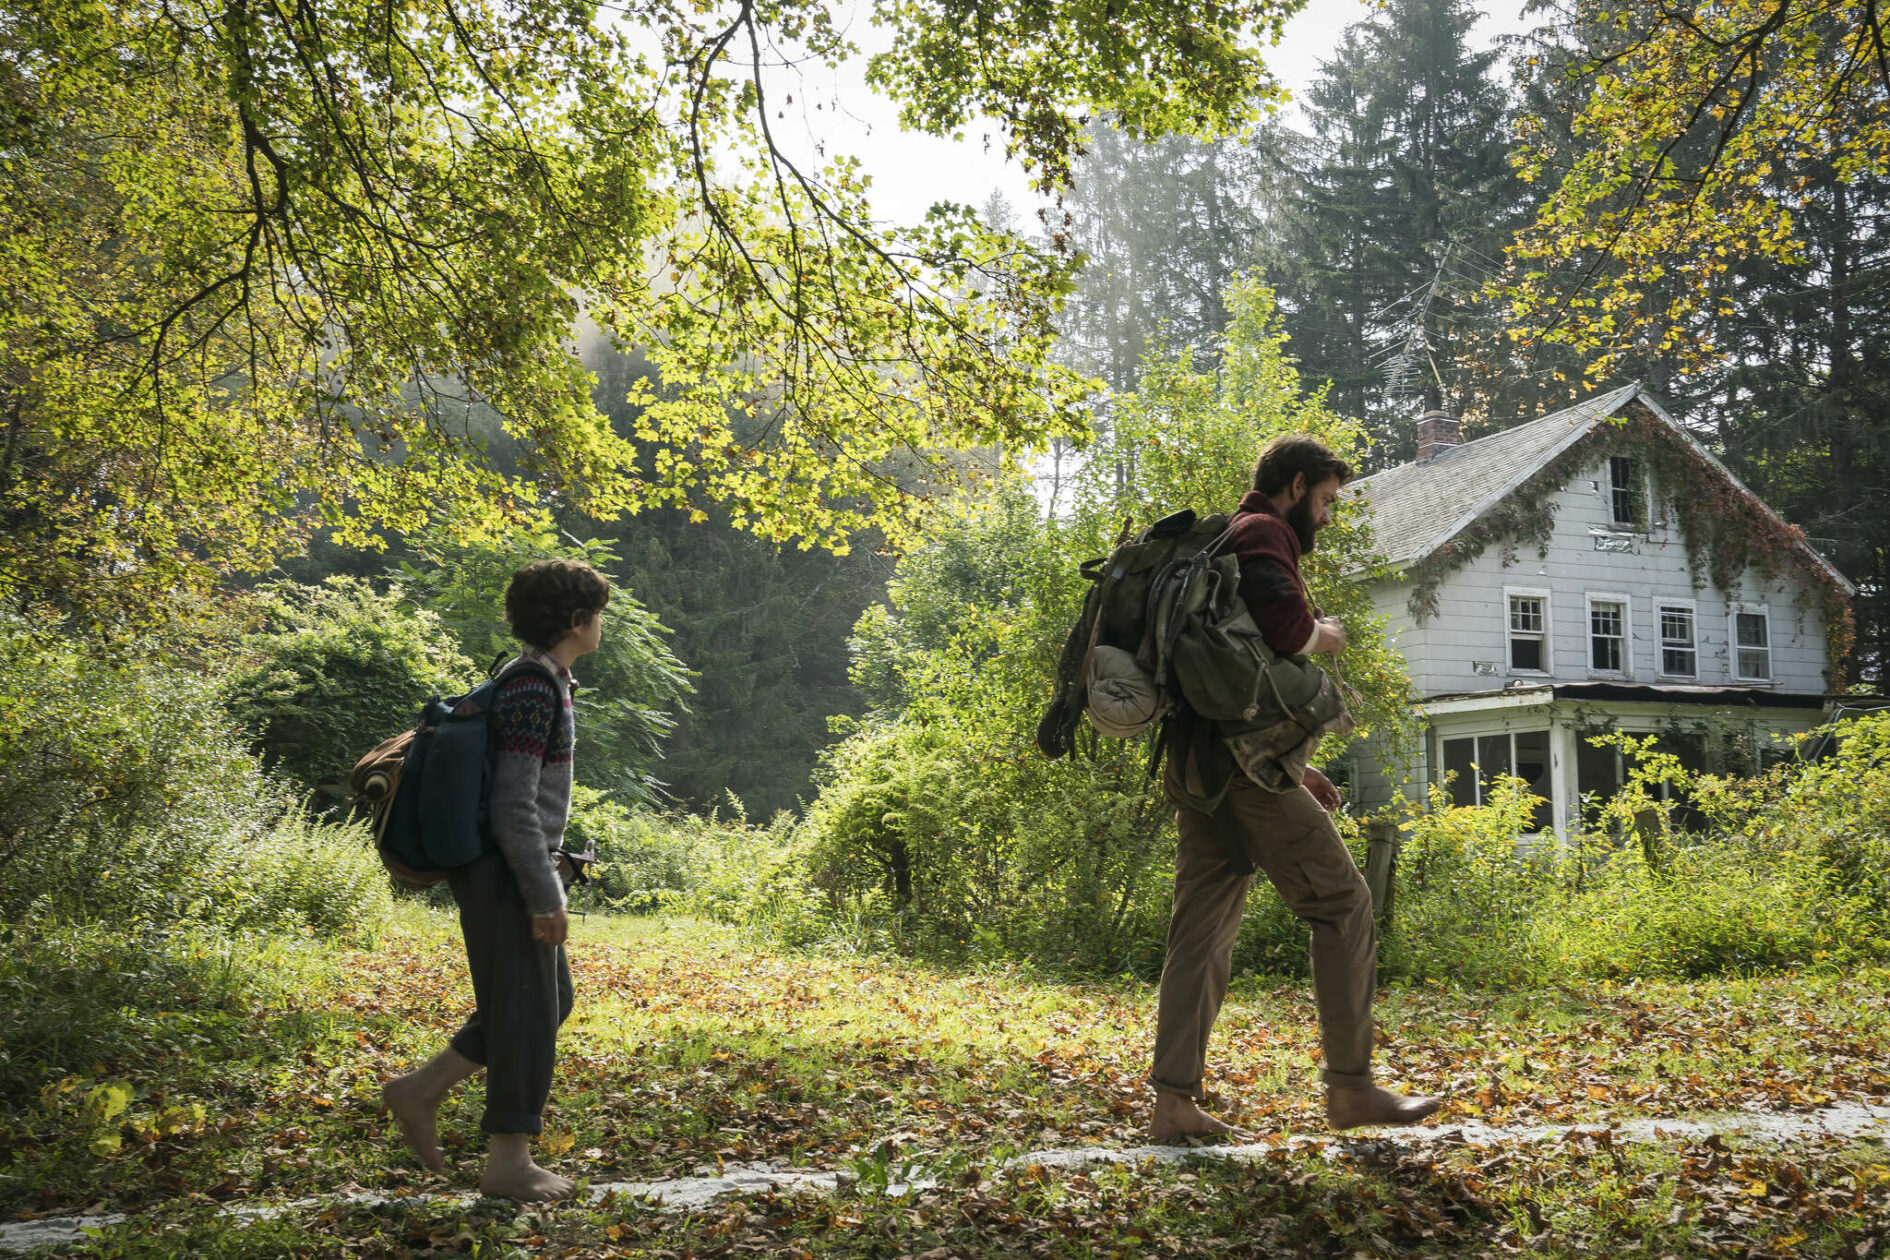 Left to right: Noah Jupe plays Marcus Abbott and John Krasinski plays Lee Abbott in A QUIET PLACE, from Paramount Pictures.